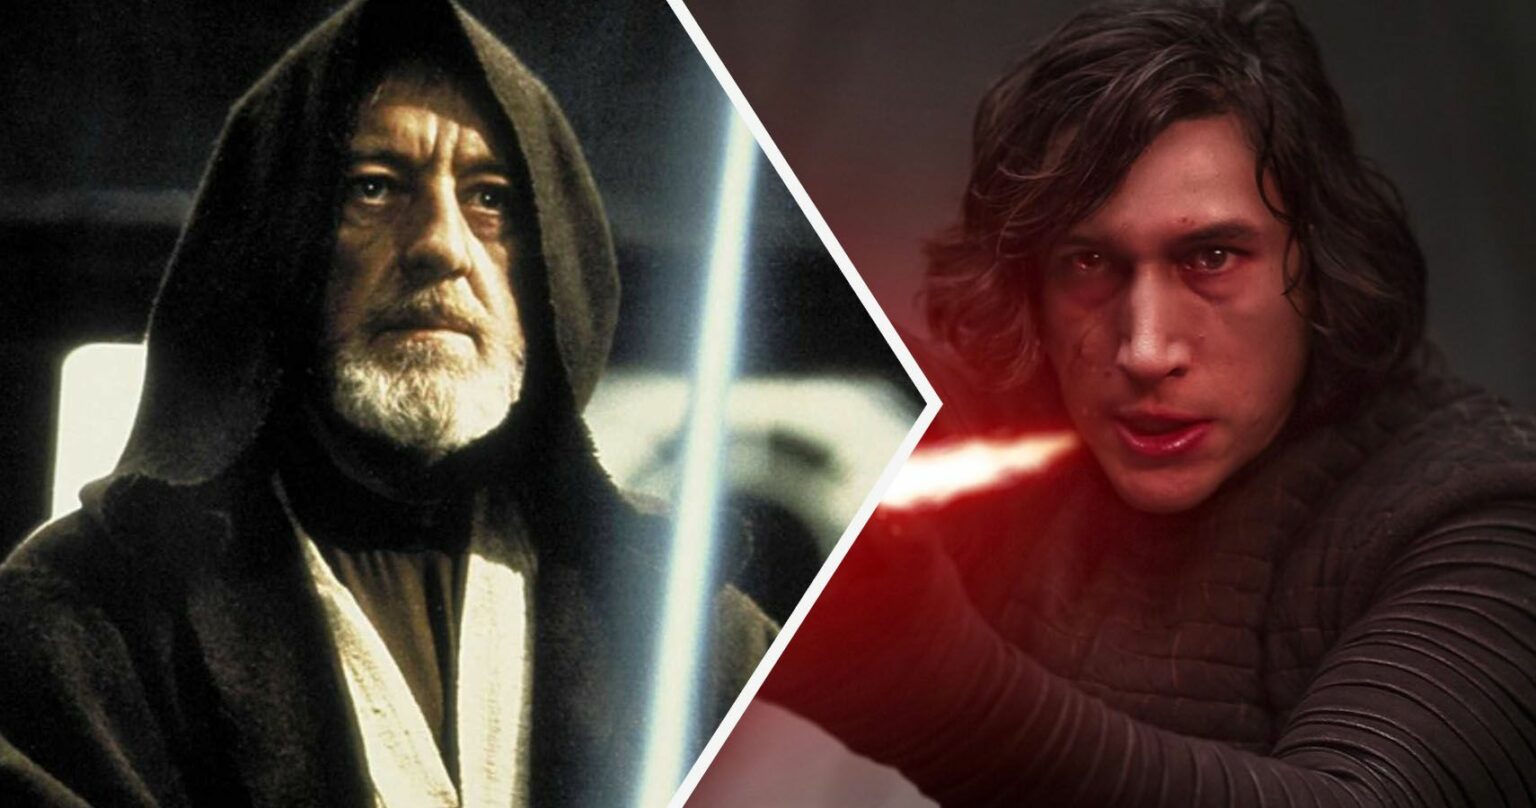 The Ultimate Star Wars Trivia: Which Actor Has Appeared in All Star Wars Movies?